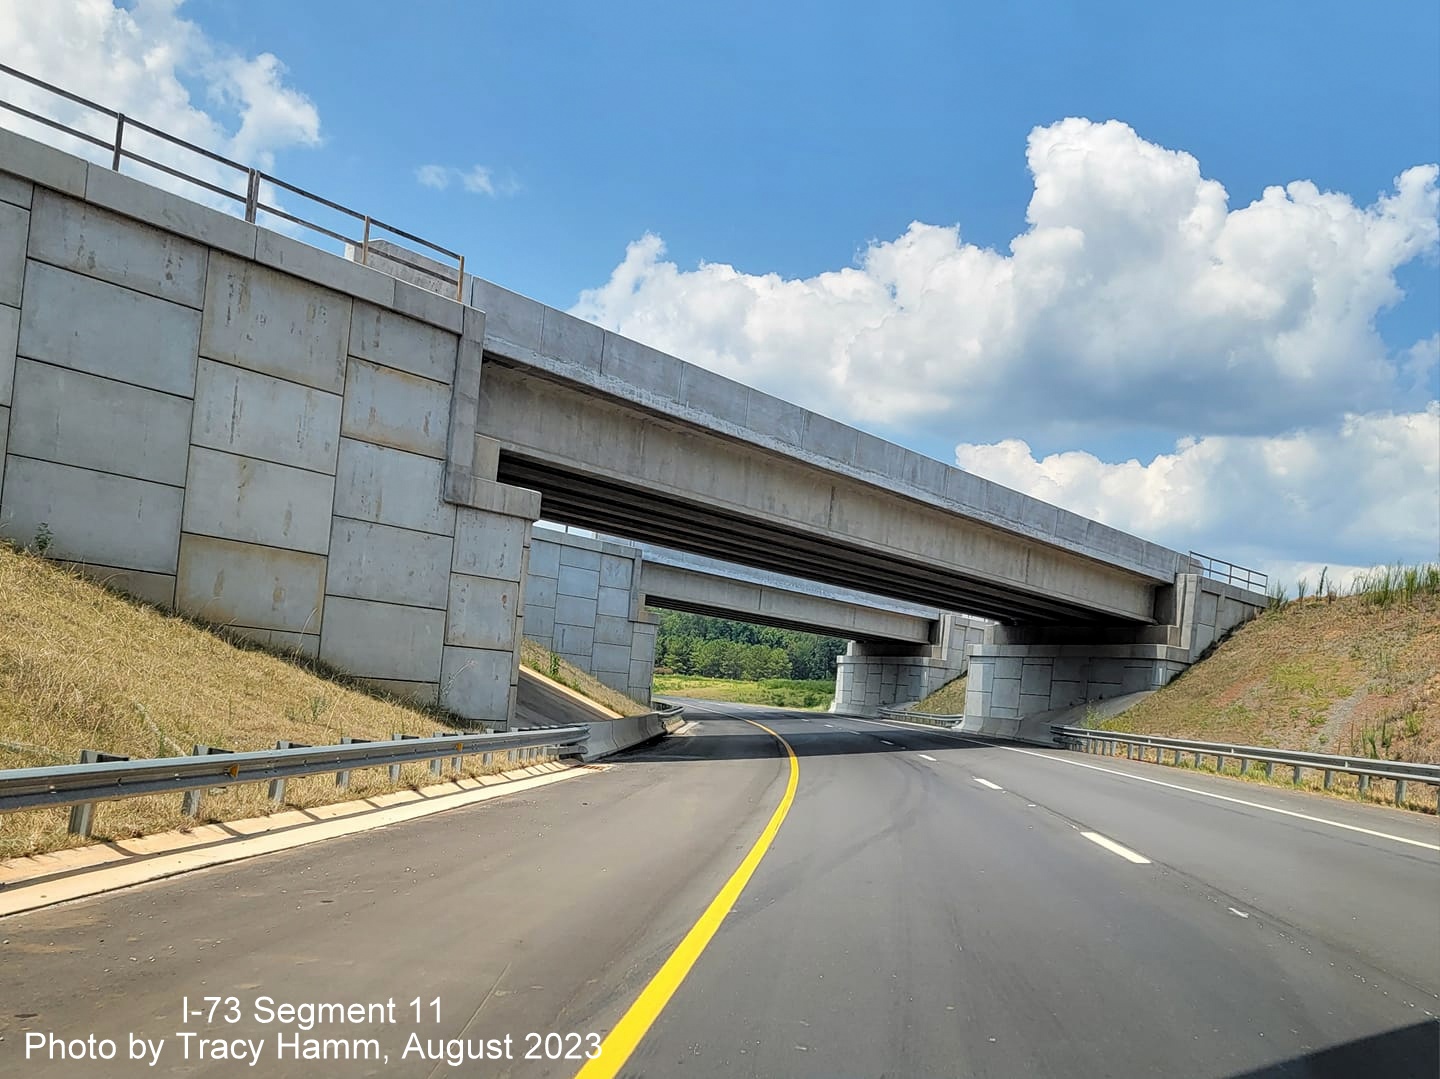 Image of 2-lane US 74 West ramp heading under bridges that will carry the future 
        I-73/I-74 Rockingham Bypass, by Tracy Hamm, August 2023